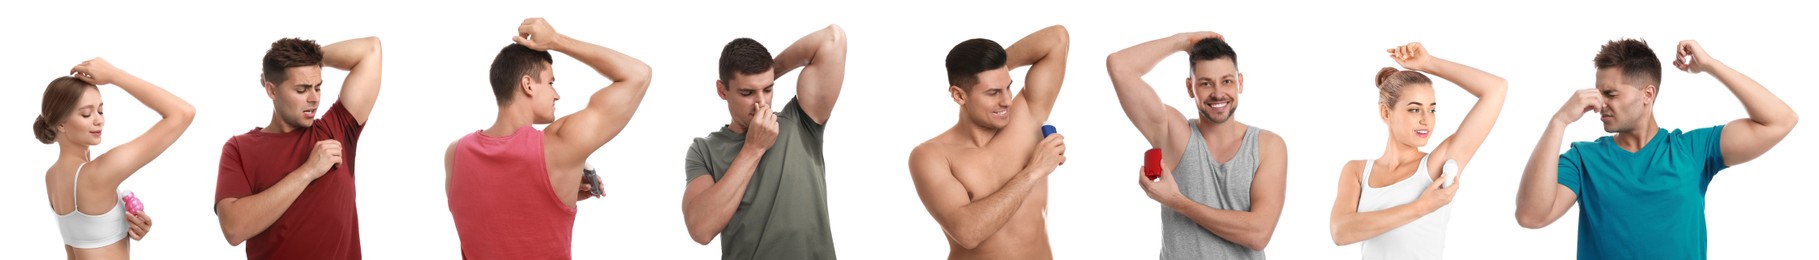 Image of Collage with photos of people applying deodorants to armpits and with sweat stains on clothes against white background. Banner design